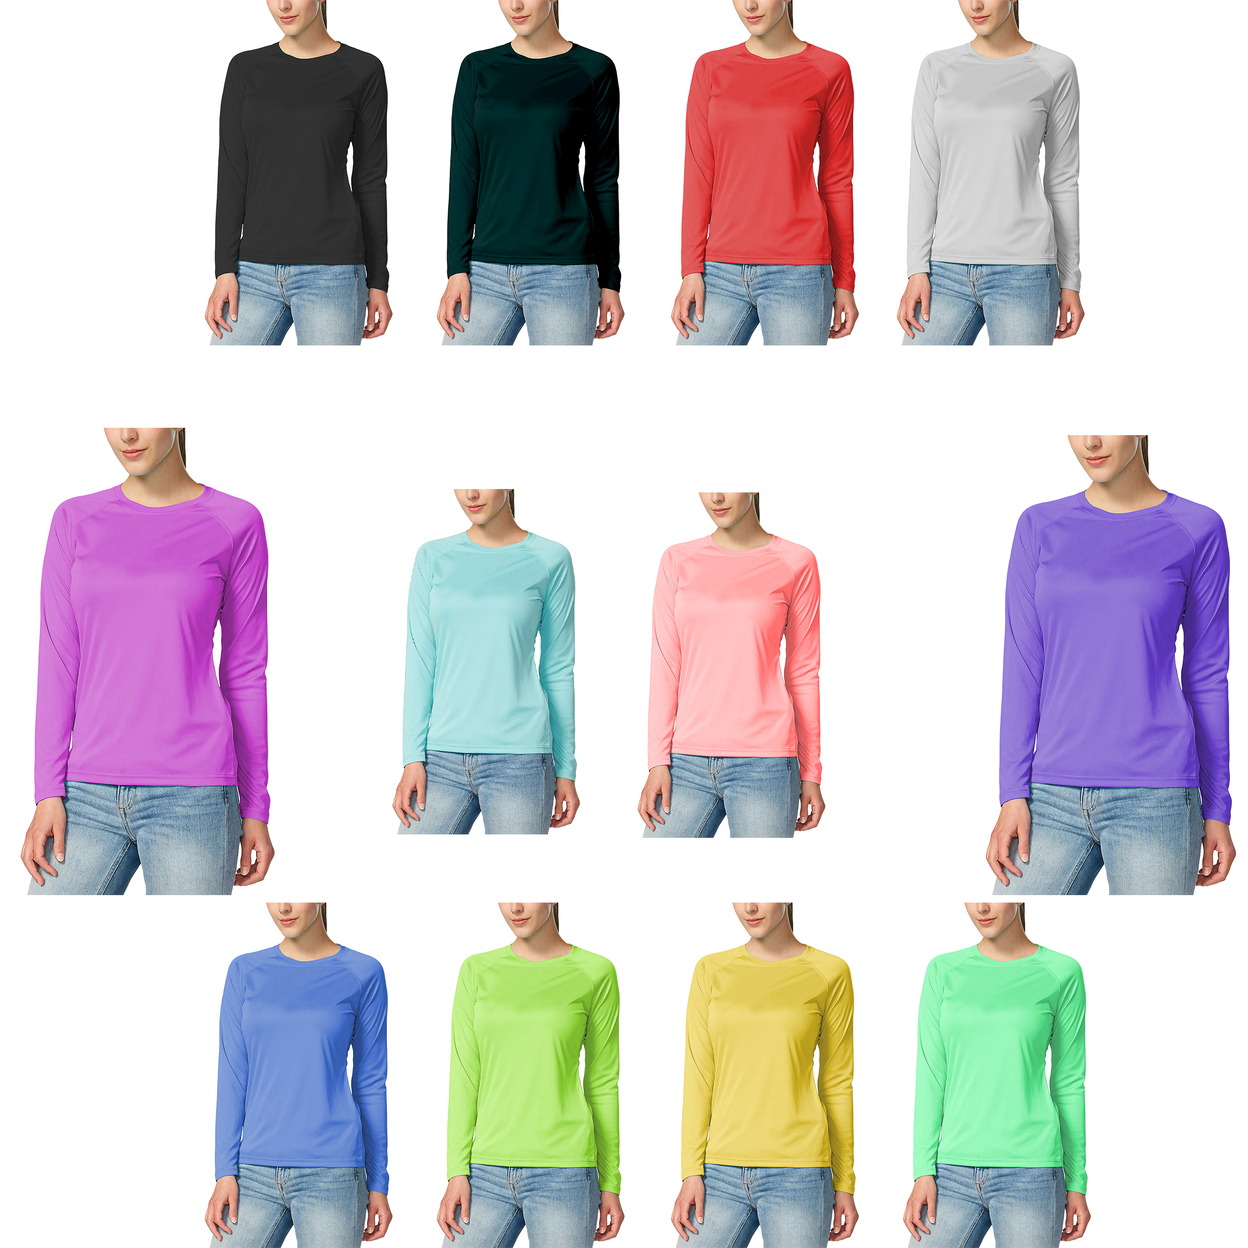 Multi-Pack: Women's Dri-Fit Moisture-Wicking Breathable Long Sleeve T-Shirt - 1-pack, Large